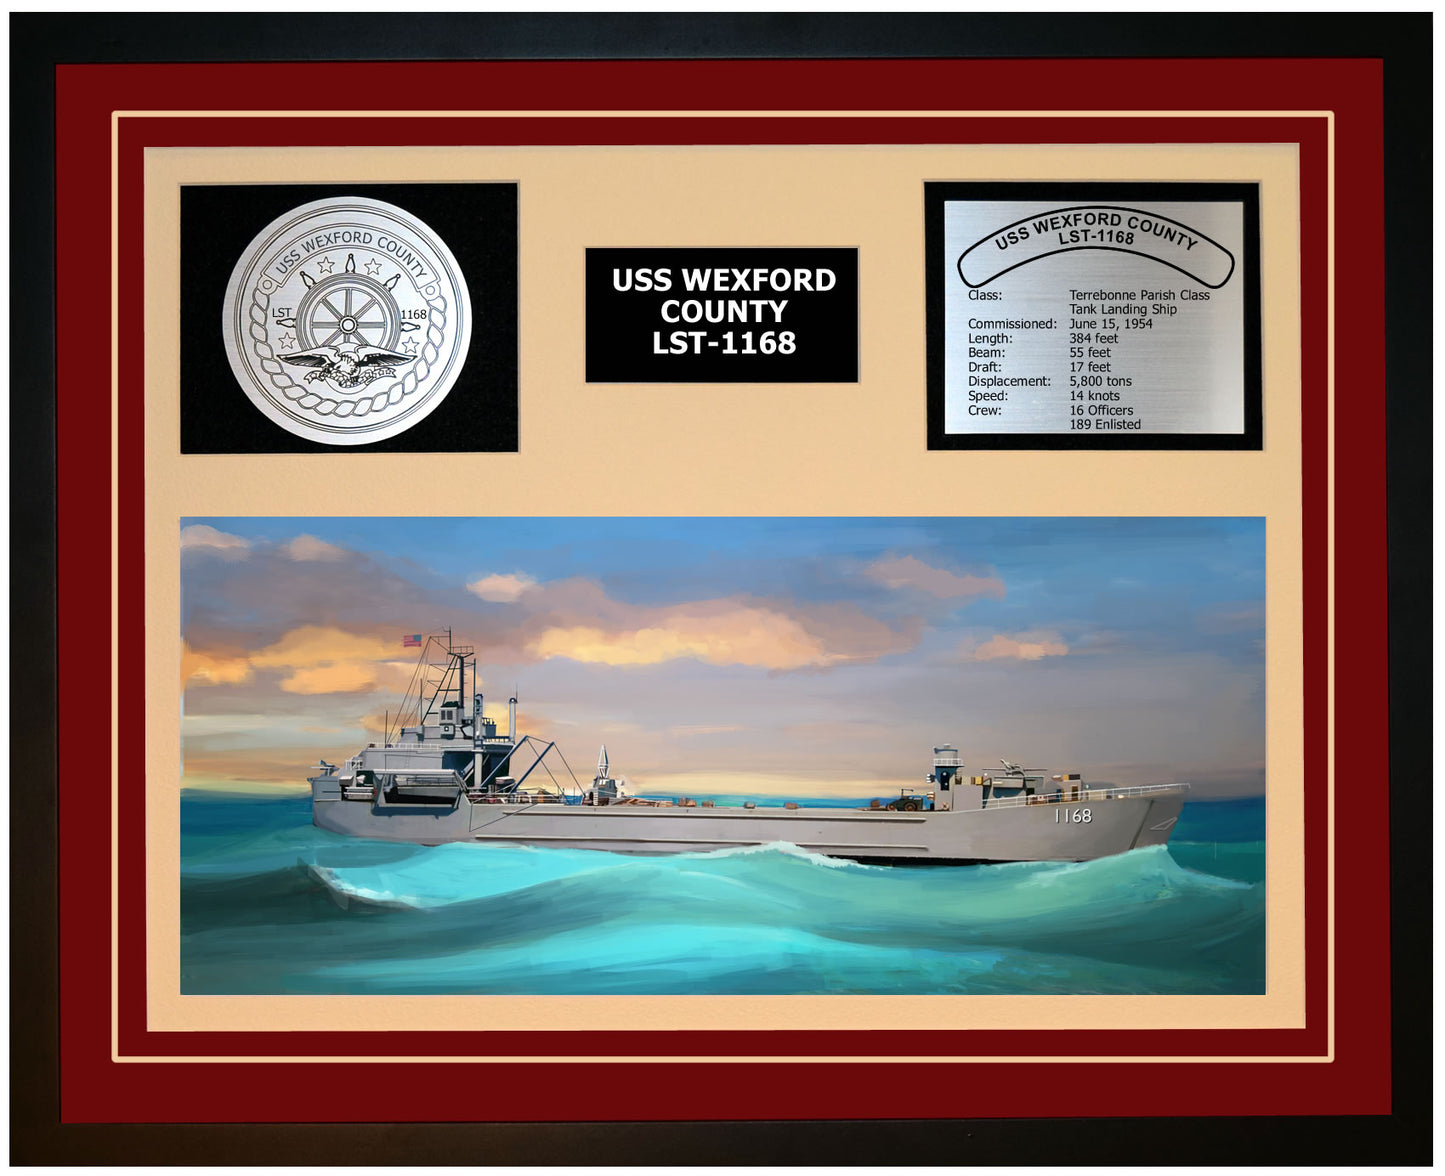 USS WEXFORD COUNTY LST-1168 Framed Navy Ship Display Burgundy